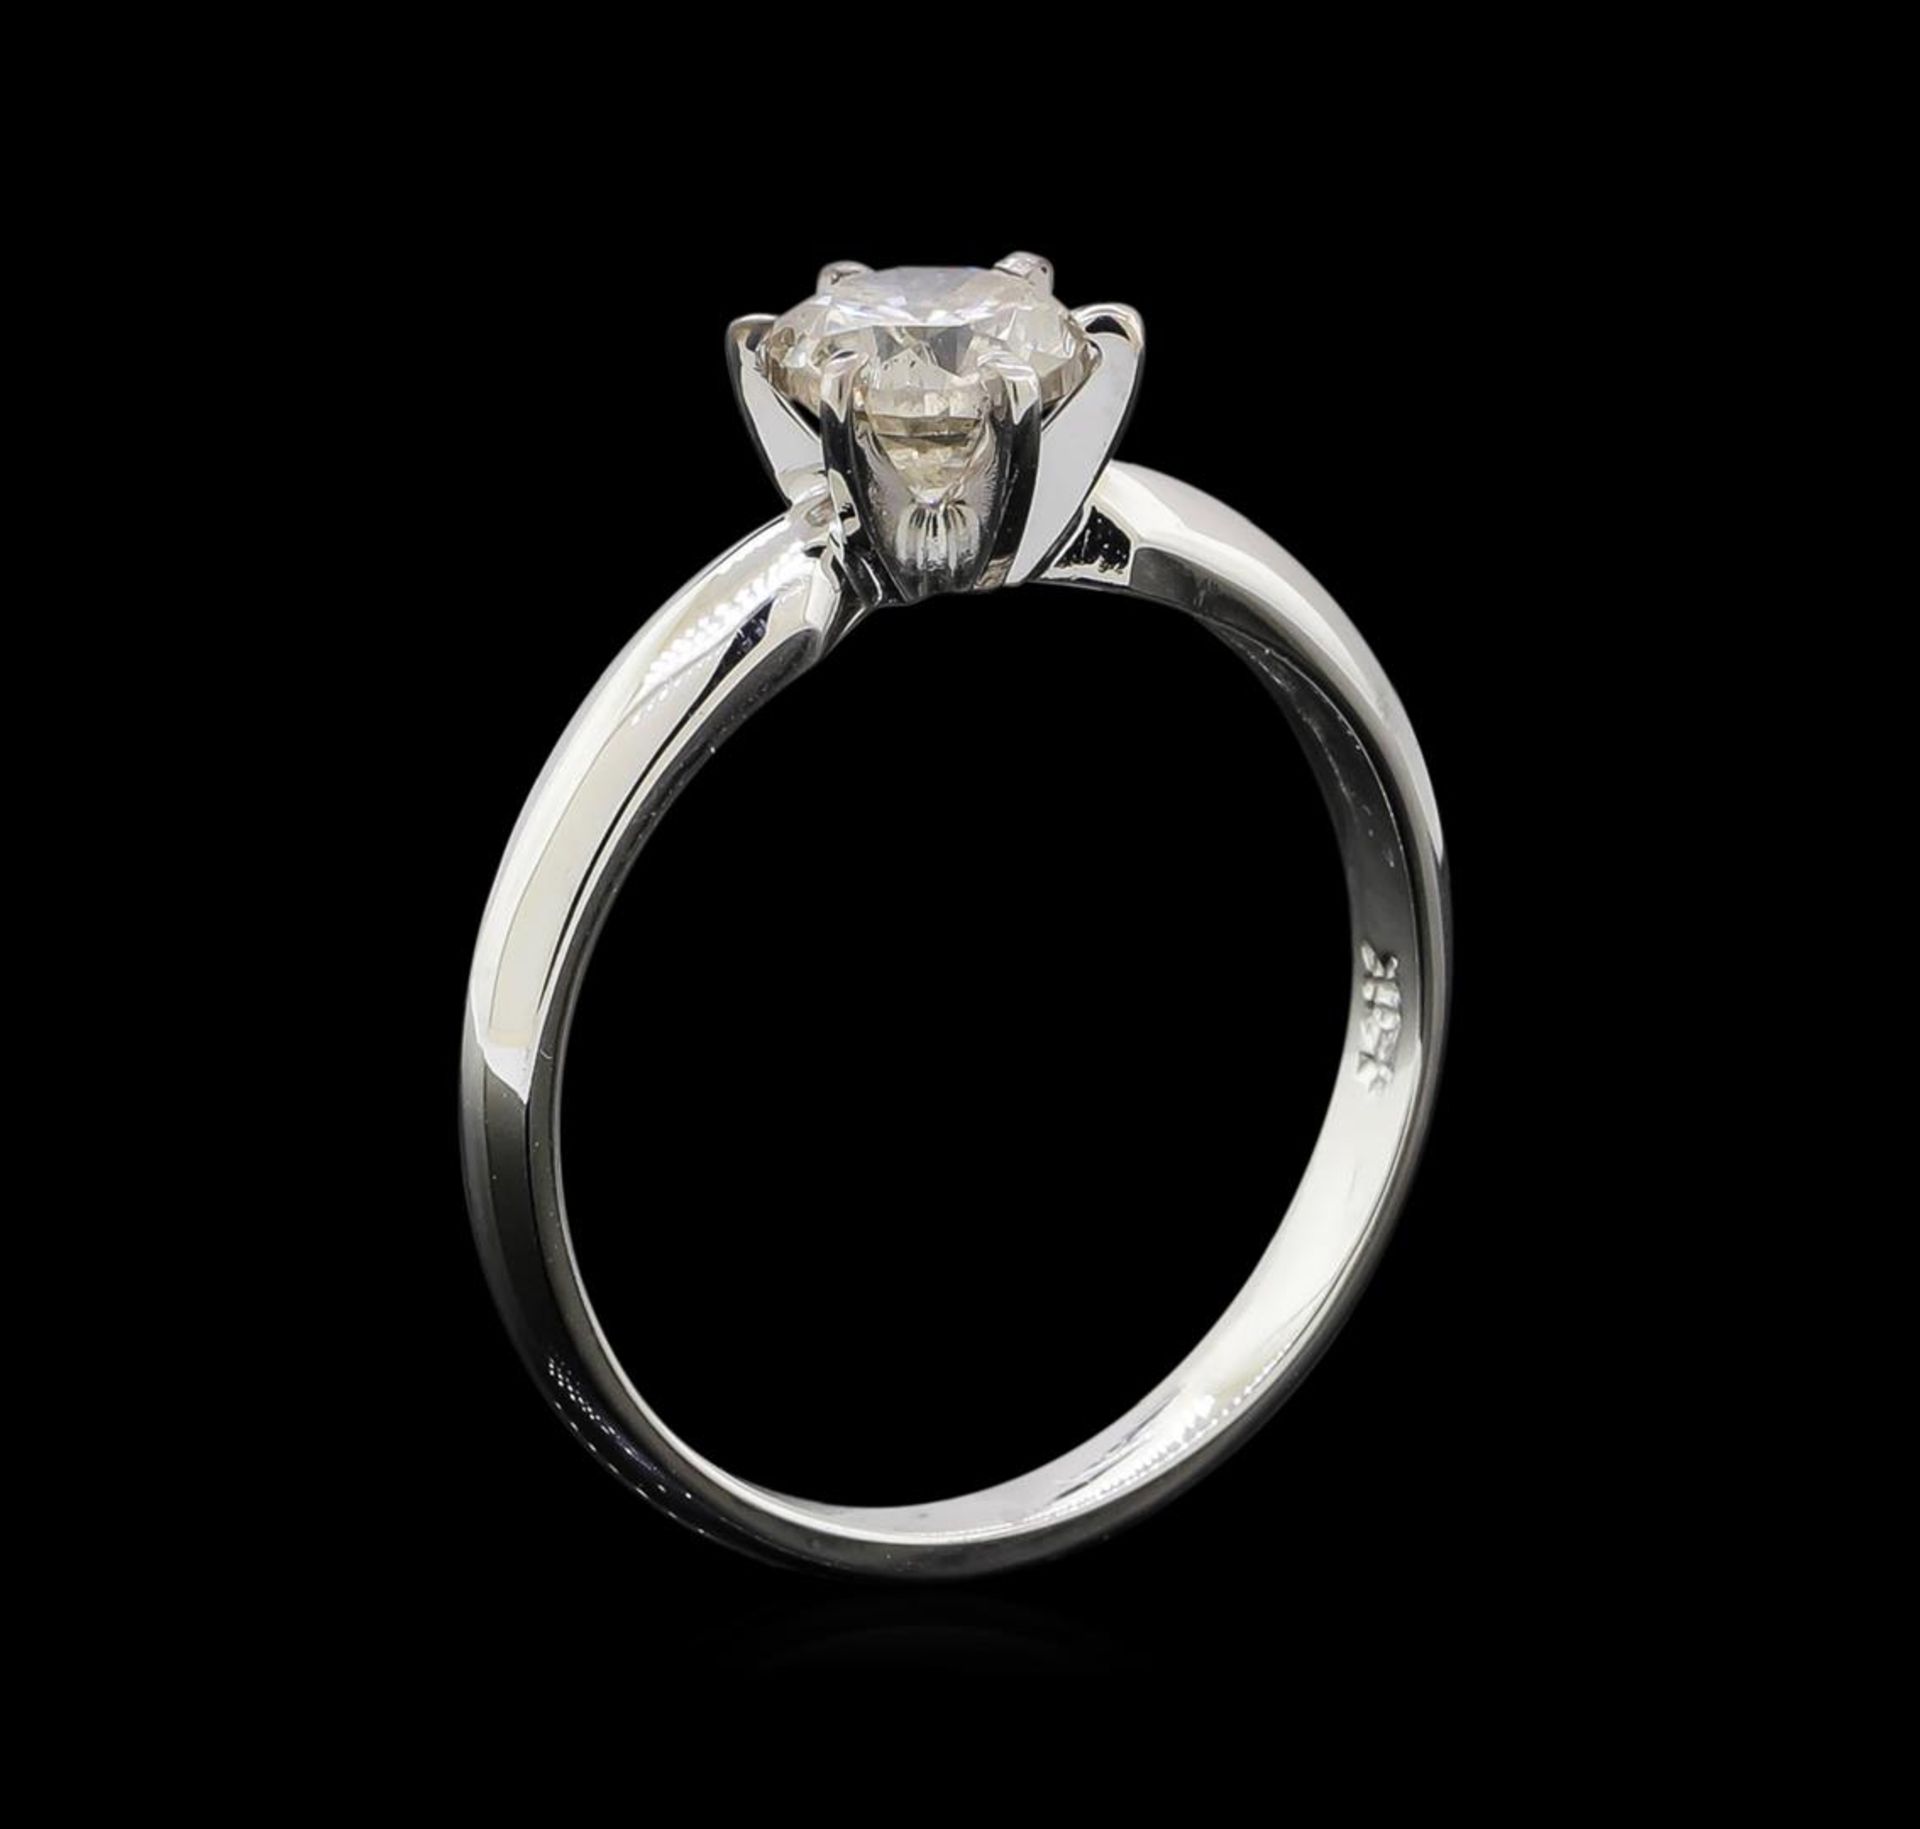 14KT White Gold 0.85 ctw Round Cut Diamond Solitaire Ring - Image 4 of 5